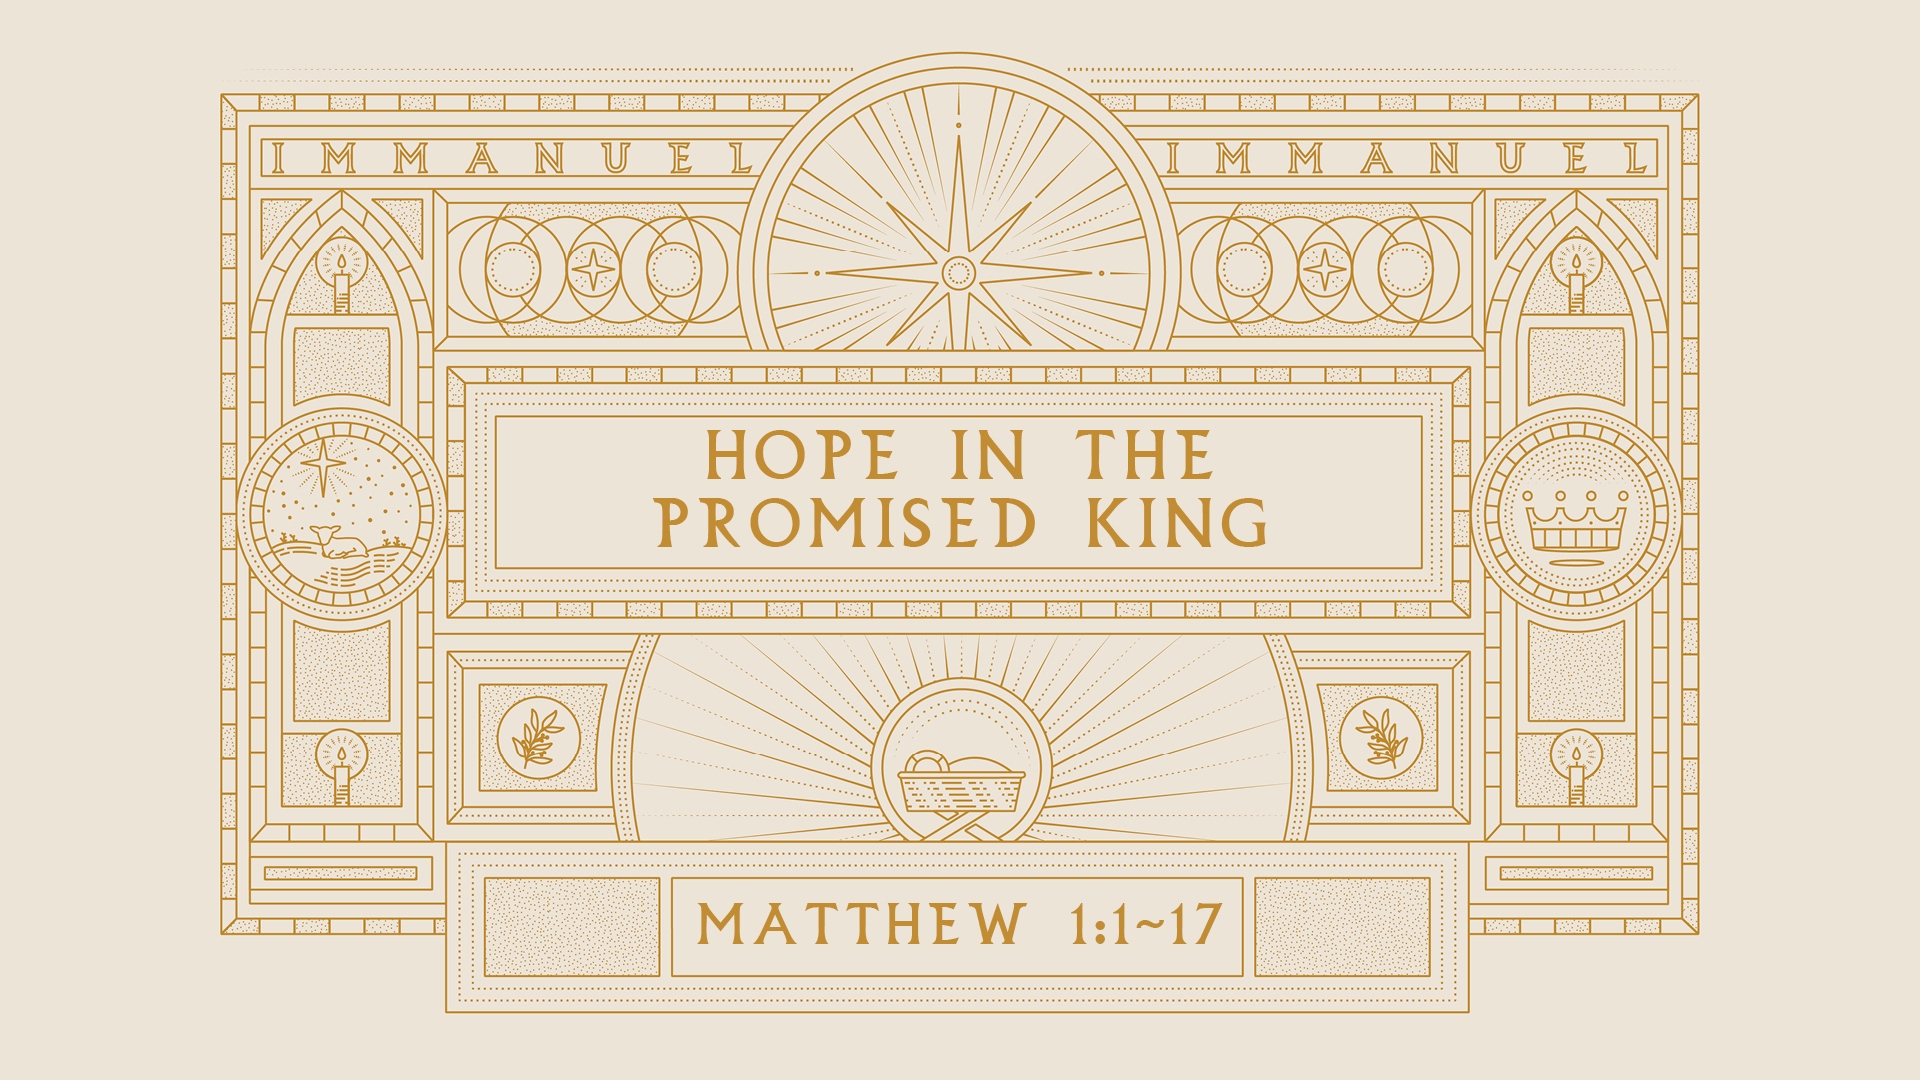 Hope in the Promised King